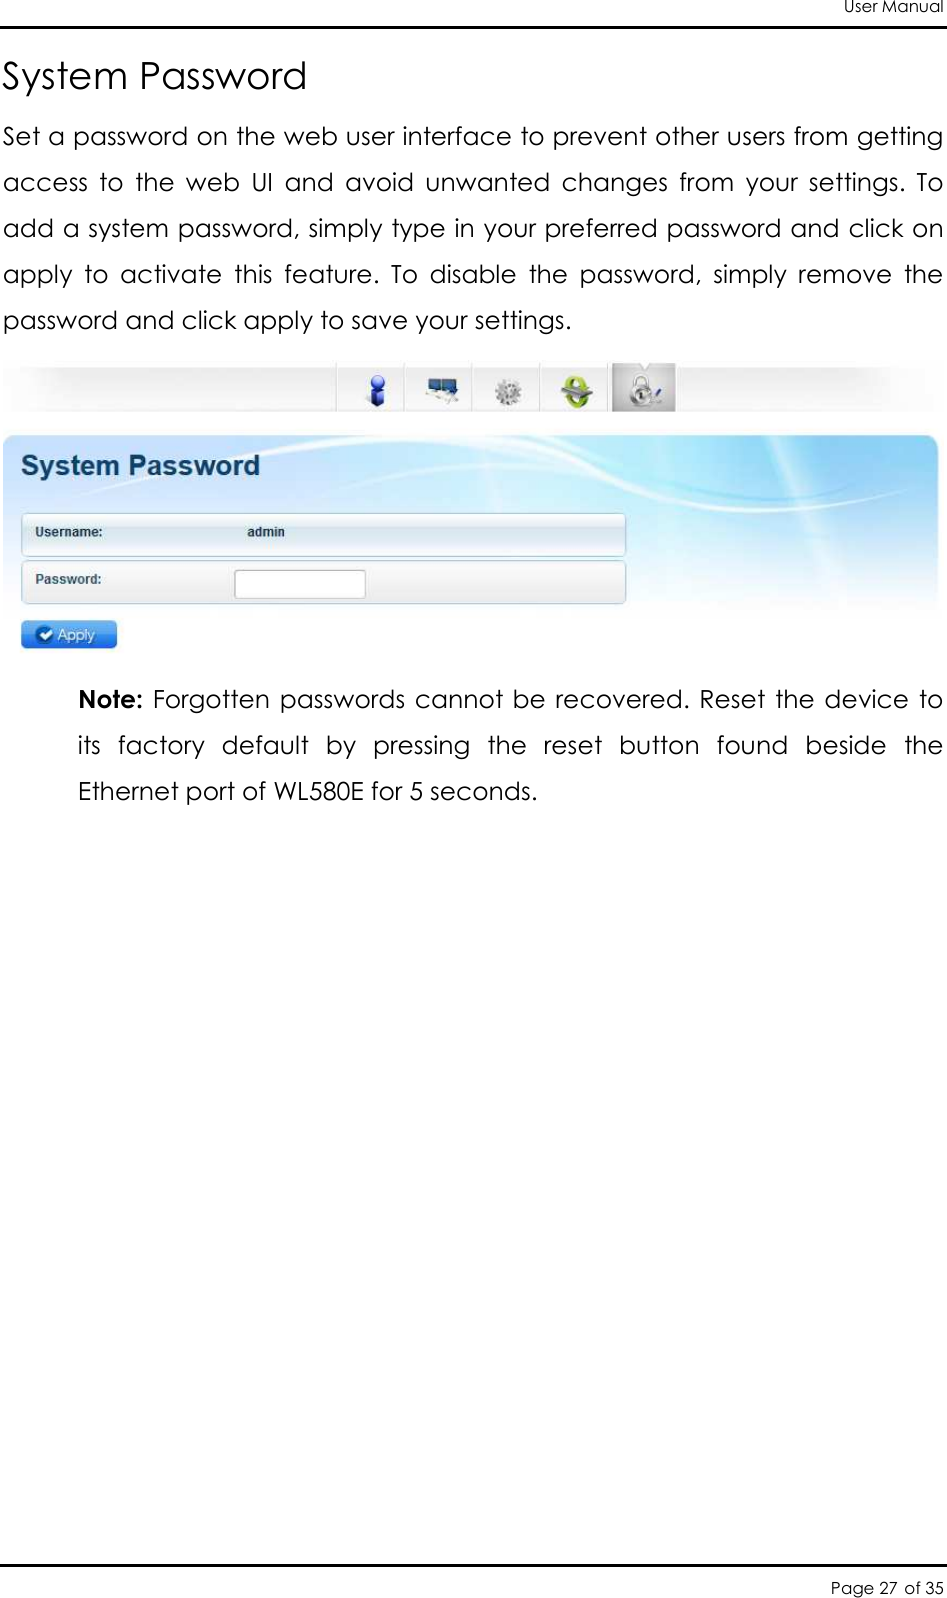 User Manual Page 27 of 35 System Password Set a password on the web user interface to prevent other users from getting access  to  the  web  UI  and  avoid  unwanted  changes  from  your  settings.  To add a system password, simply type in your preferred password and click on apply  to  activate  this  feature.  To  disable  the  password,  simply  remove  the password and click apply to save your settings.  Note: Forgotten passwords  cannot be recovered. Reset the device to its  factory  default  by  pressing  the  reset  button  found  beside  the Ethernet port of WL580E for 5 seconds. 